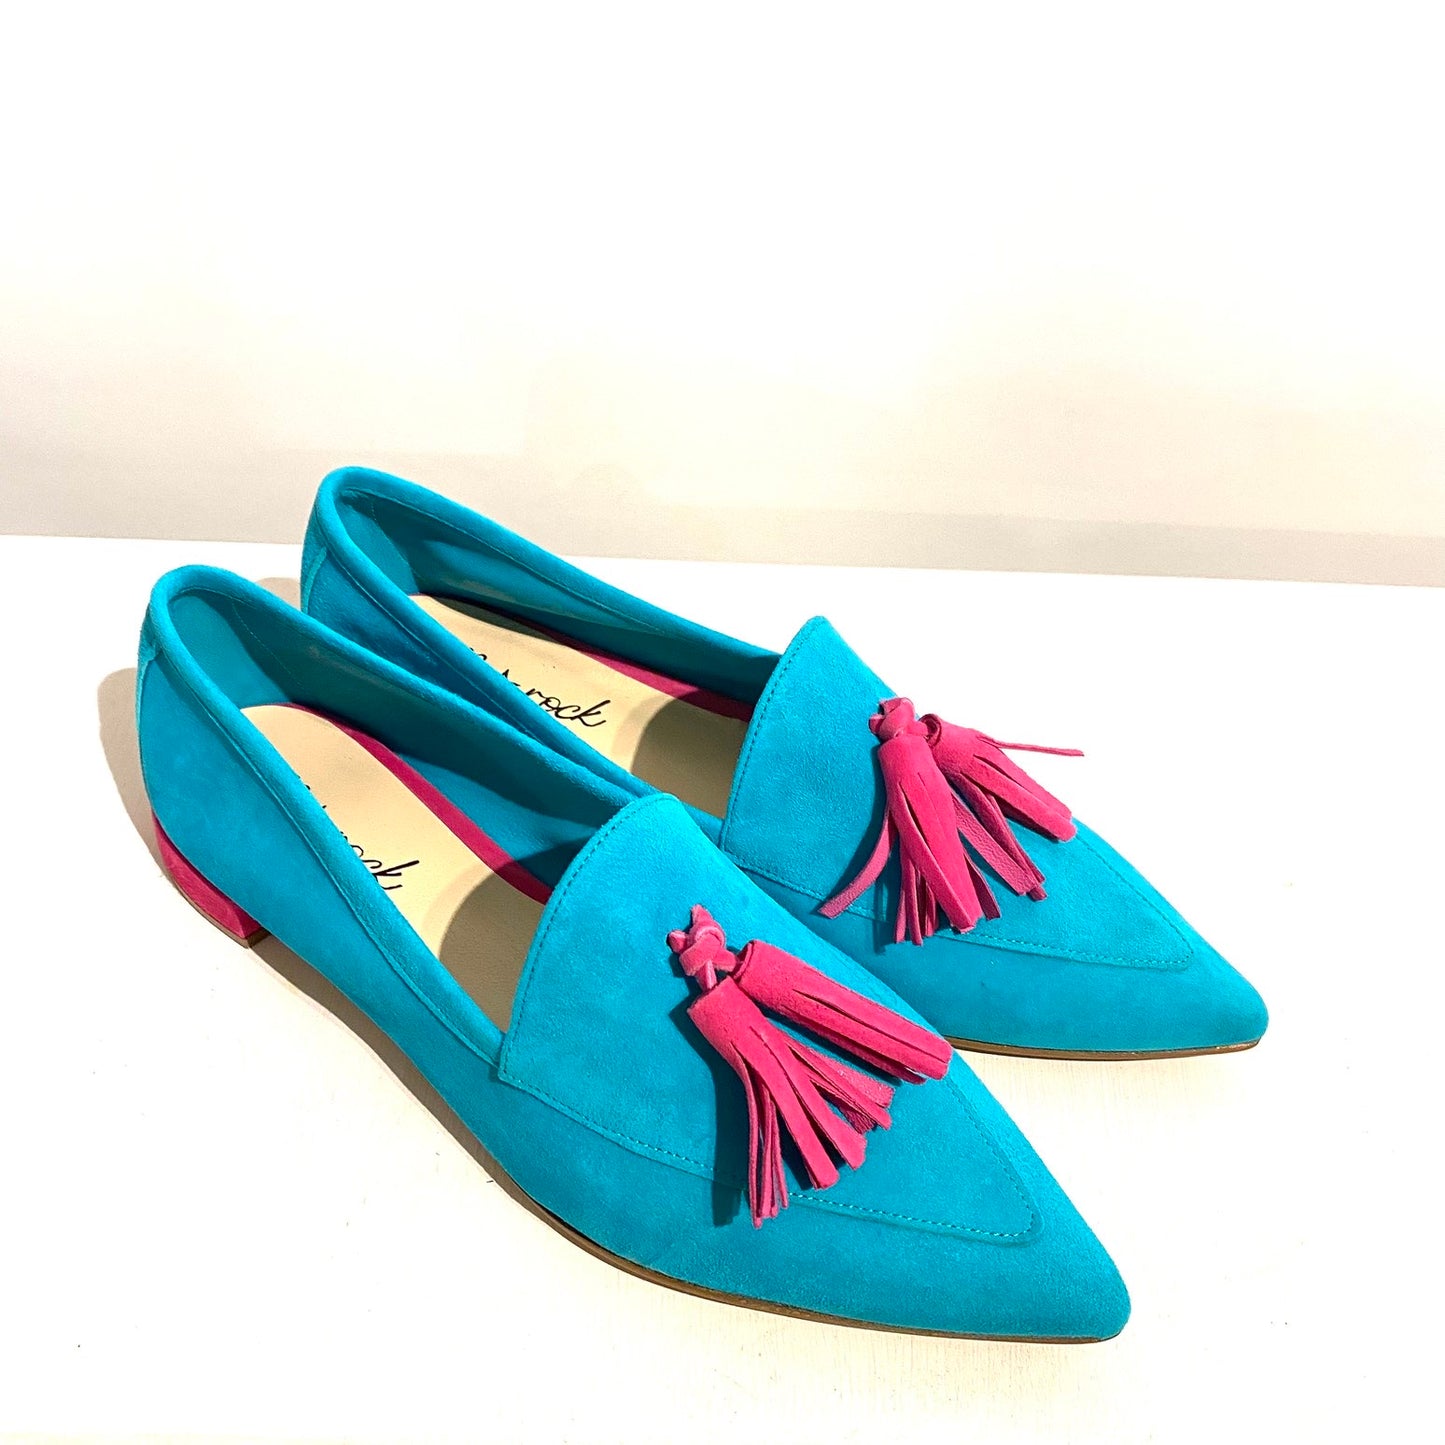 Turquoise moccasin